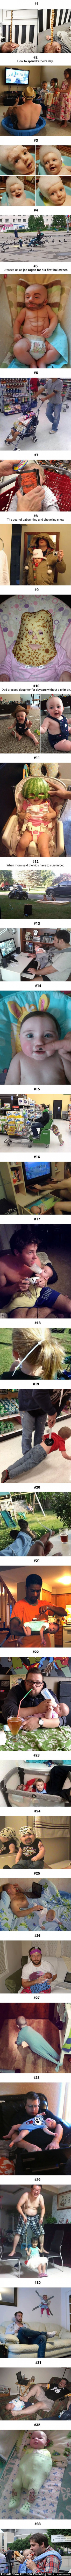 33 Times Dads Proved Parenting Is Awesome